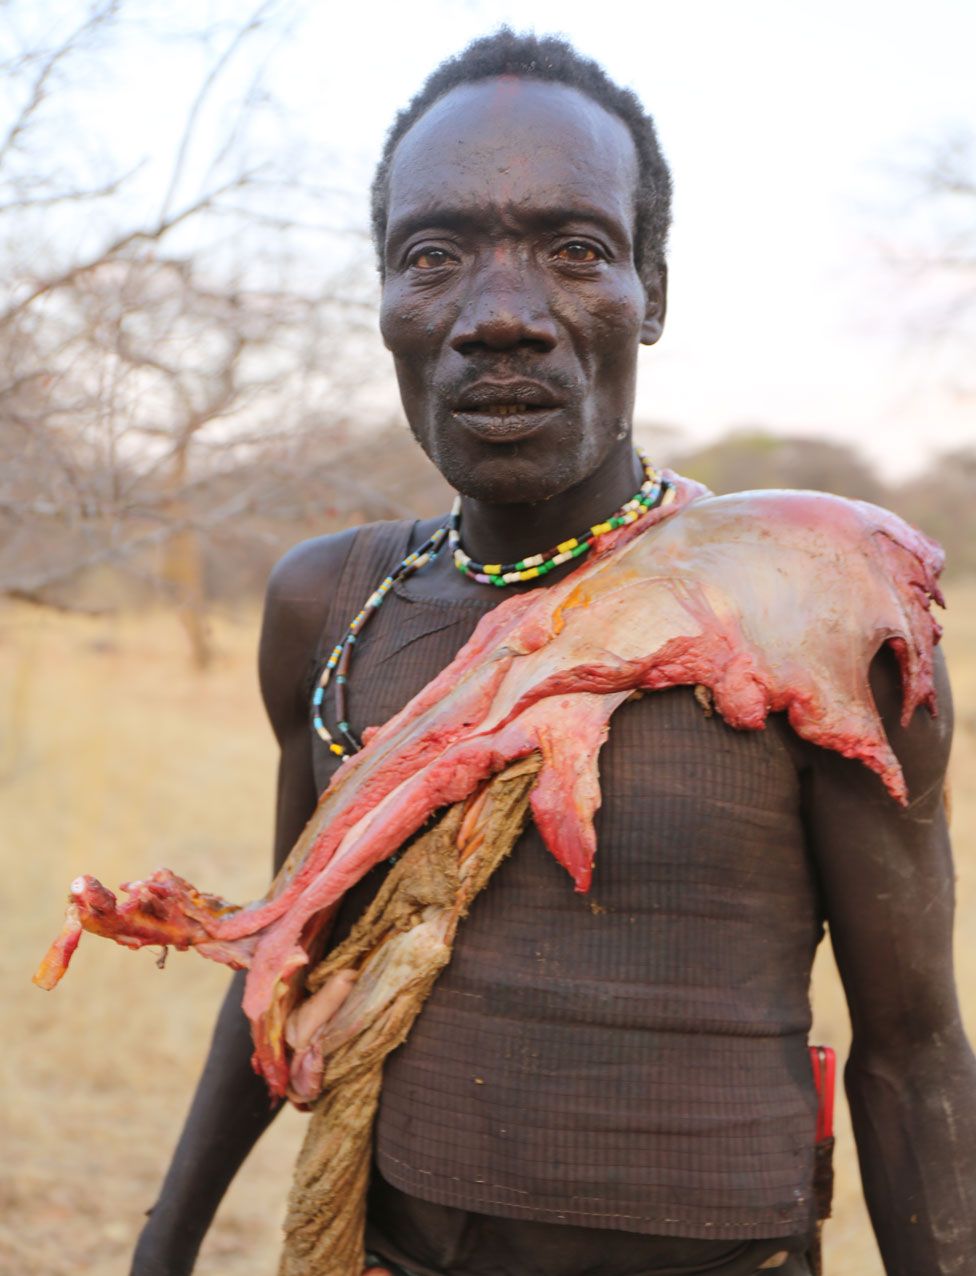 Hadza man carrying meat